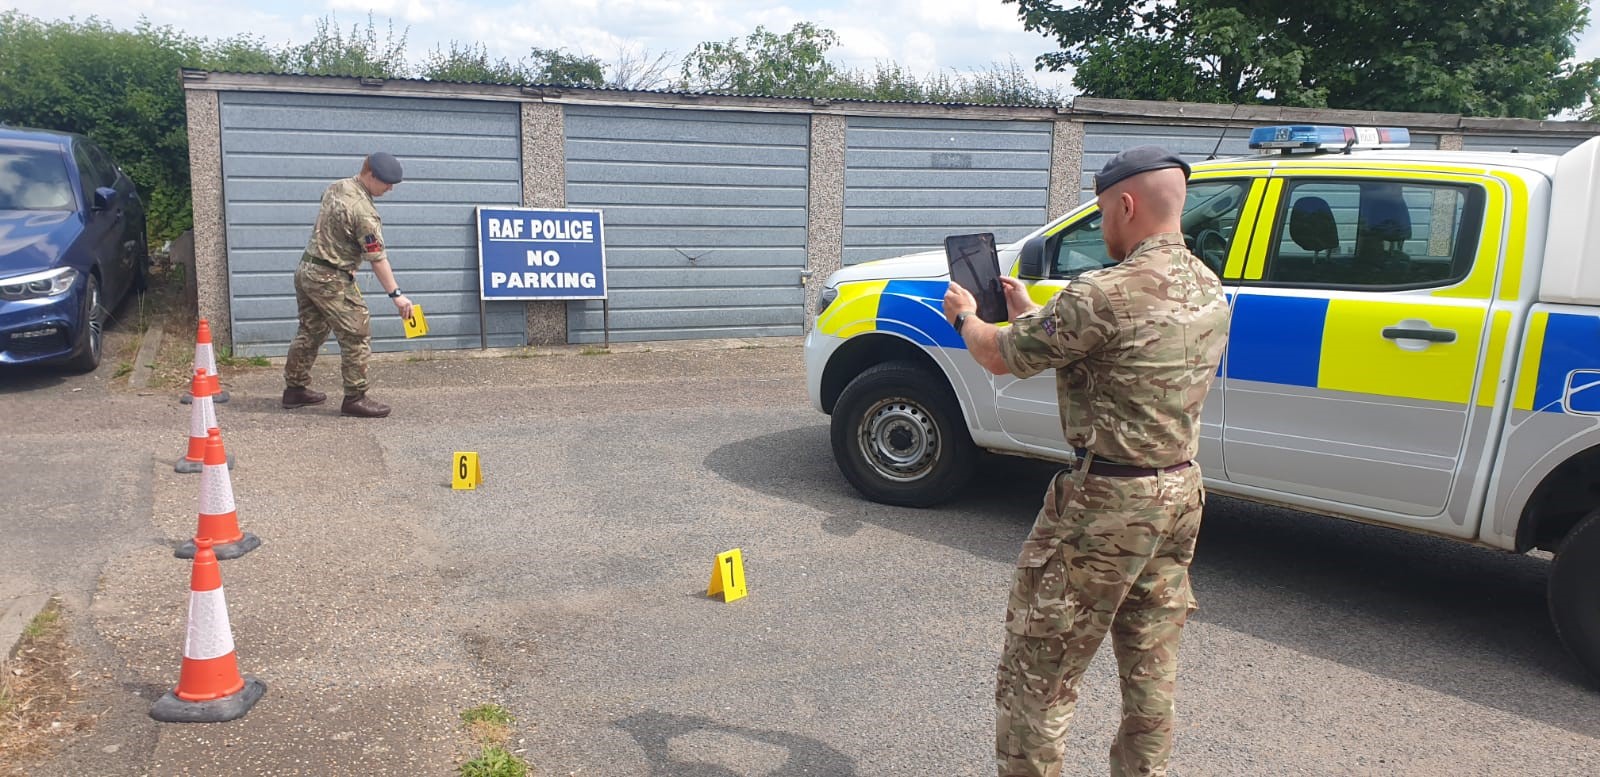 Image shows RAF Police Officers at a improvised crime scene setting out cones and using tablet technology.